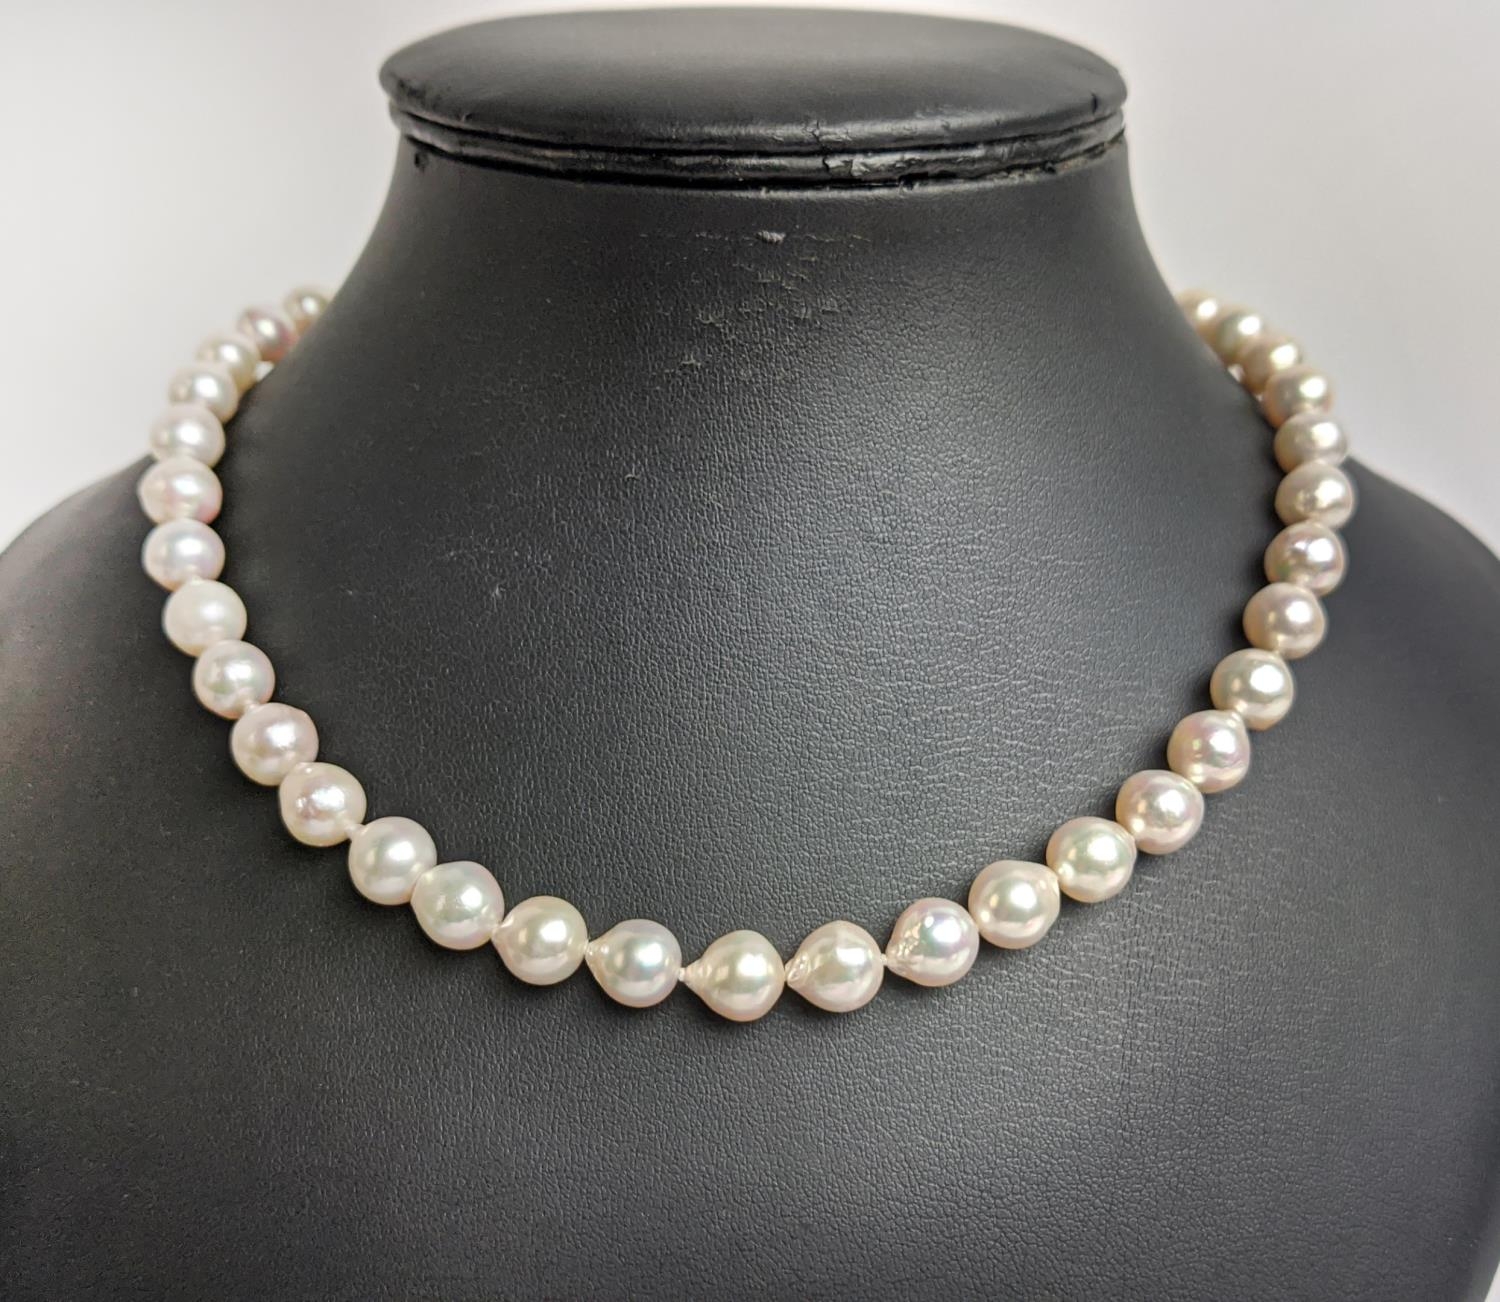 CULTURED PEARL SINGLE STRAND NECKLACE, each pearl of round irregular form, 8mm diam approx, 14ct - Image 2 of 5